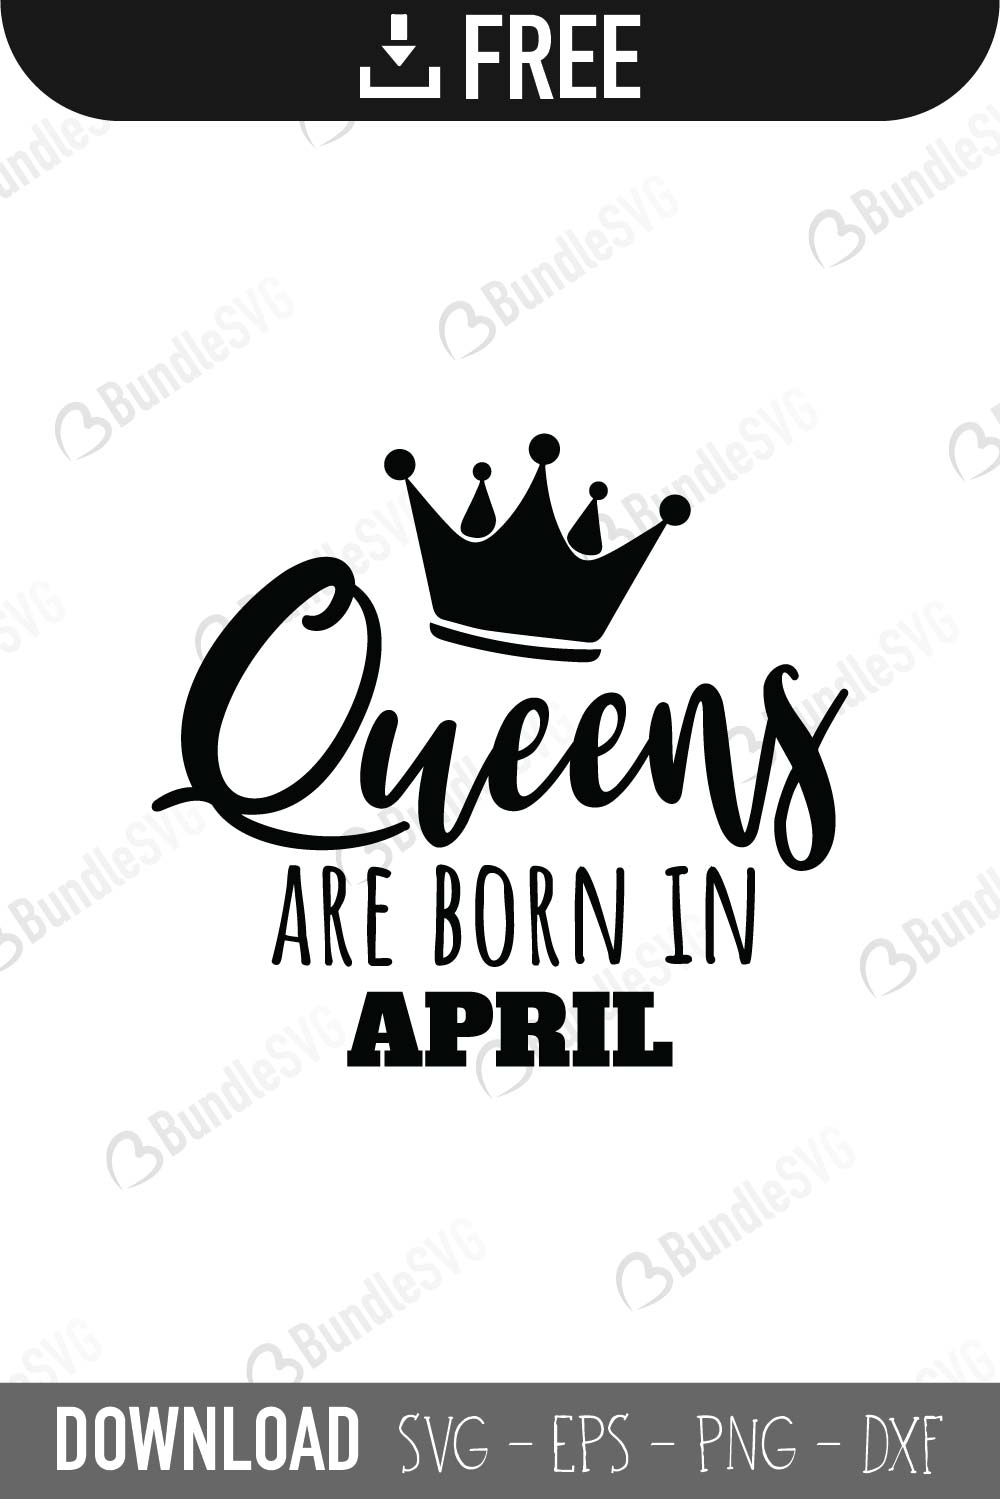 Download Queens Are Born In April Svg Tiara Cut Files For Cricut Dxf Png Digital Download Eps Cdr Silhouette Birthday Queen Svg Crown Clip Art Art Collectibles Evamusic Rs